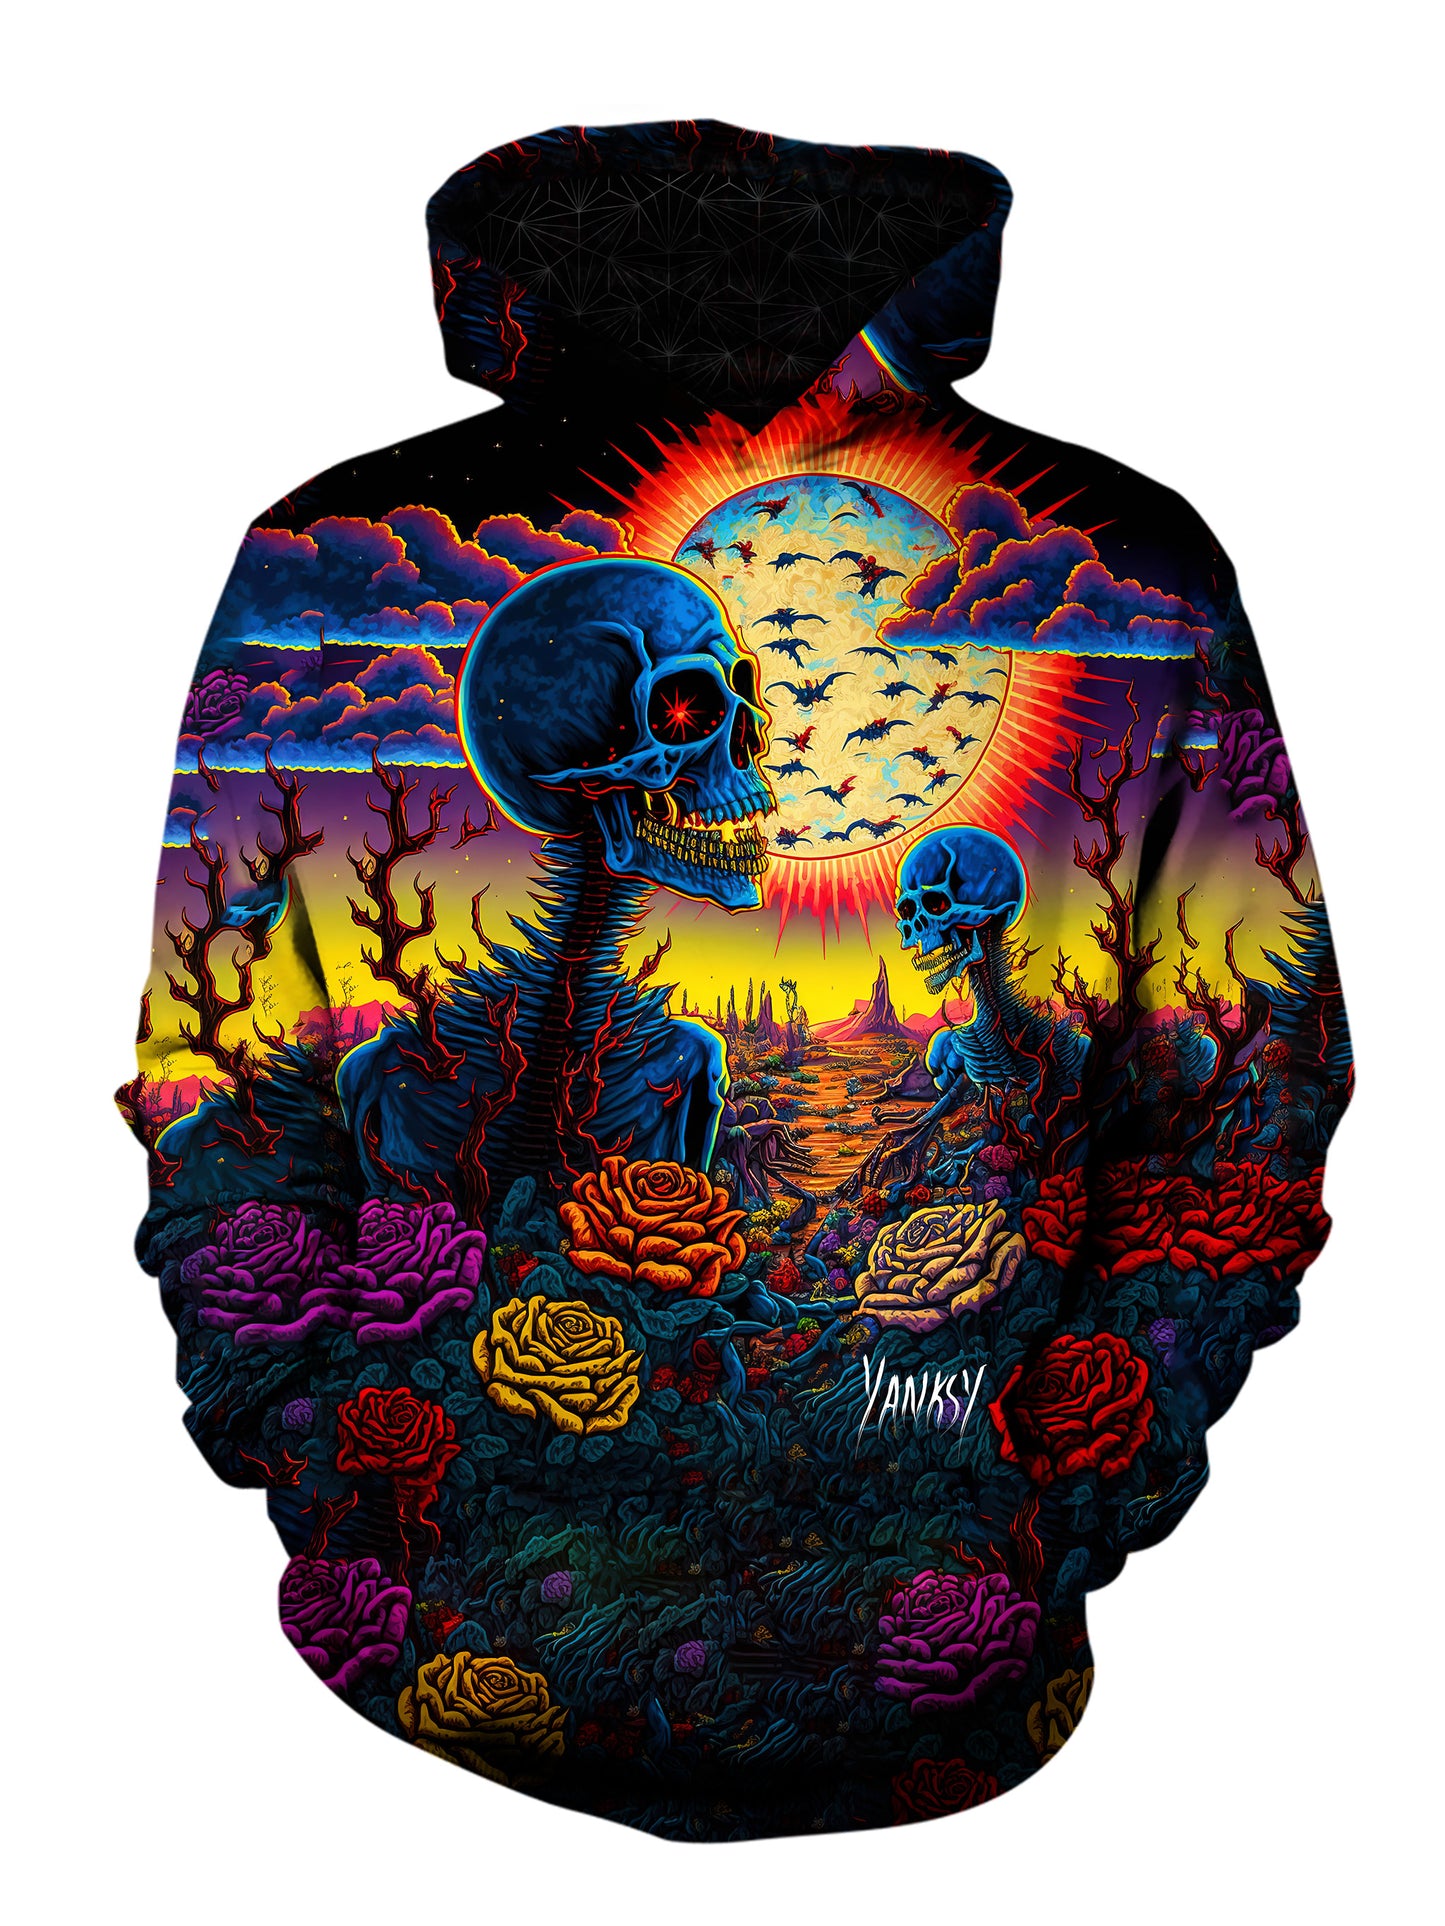 Get lost in the mesmerizing patterns of this psychedelic hoodie